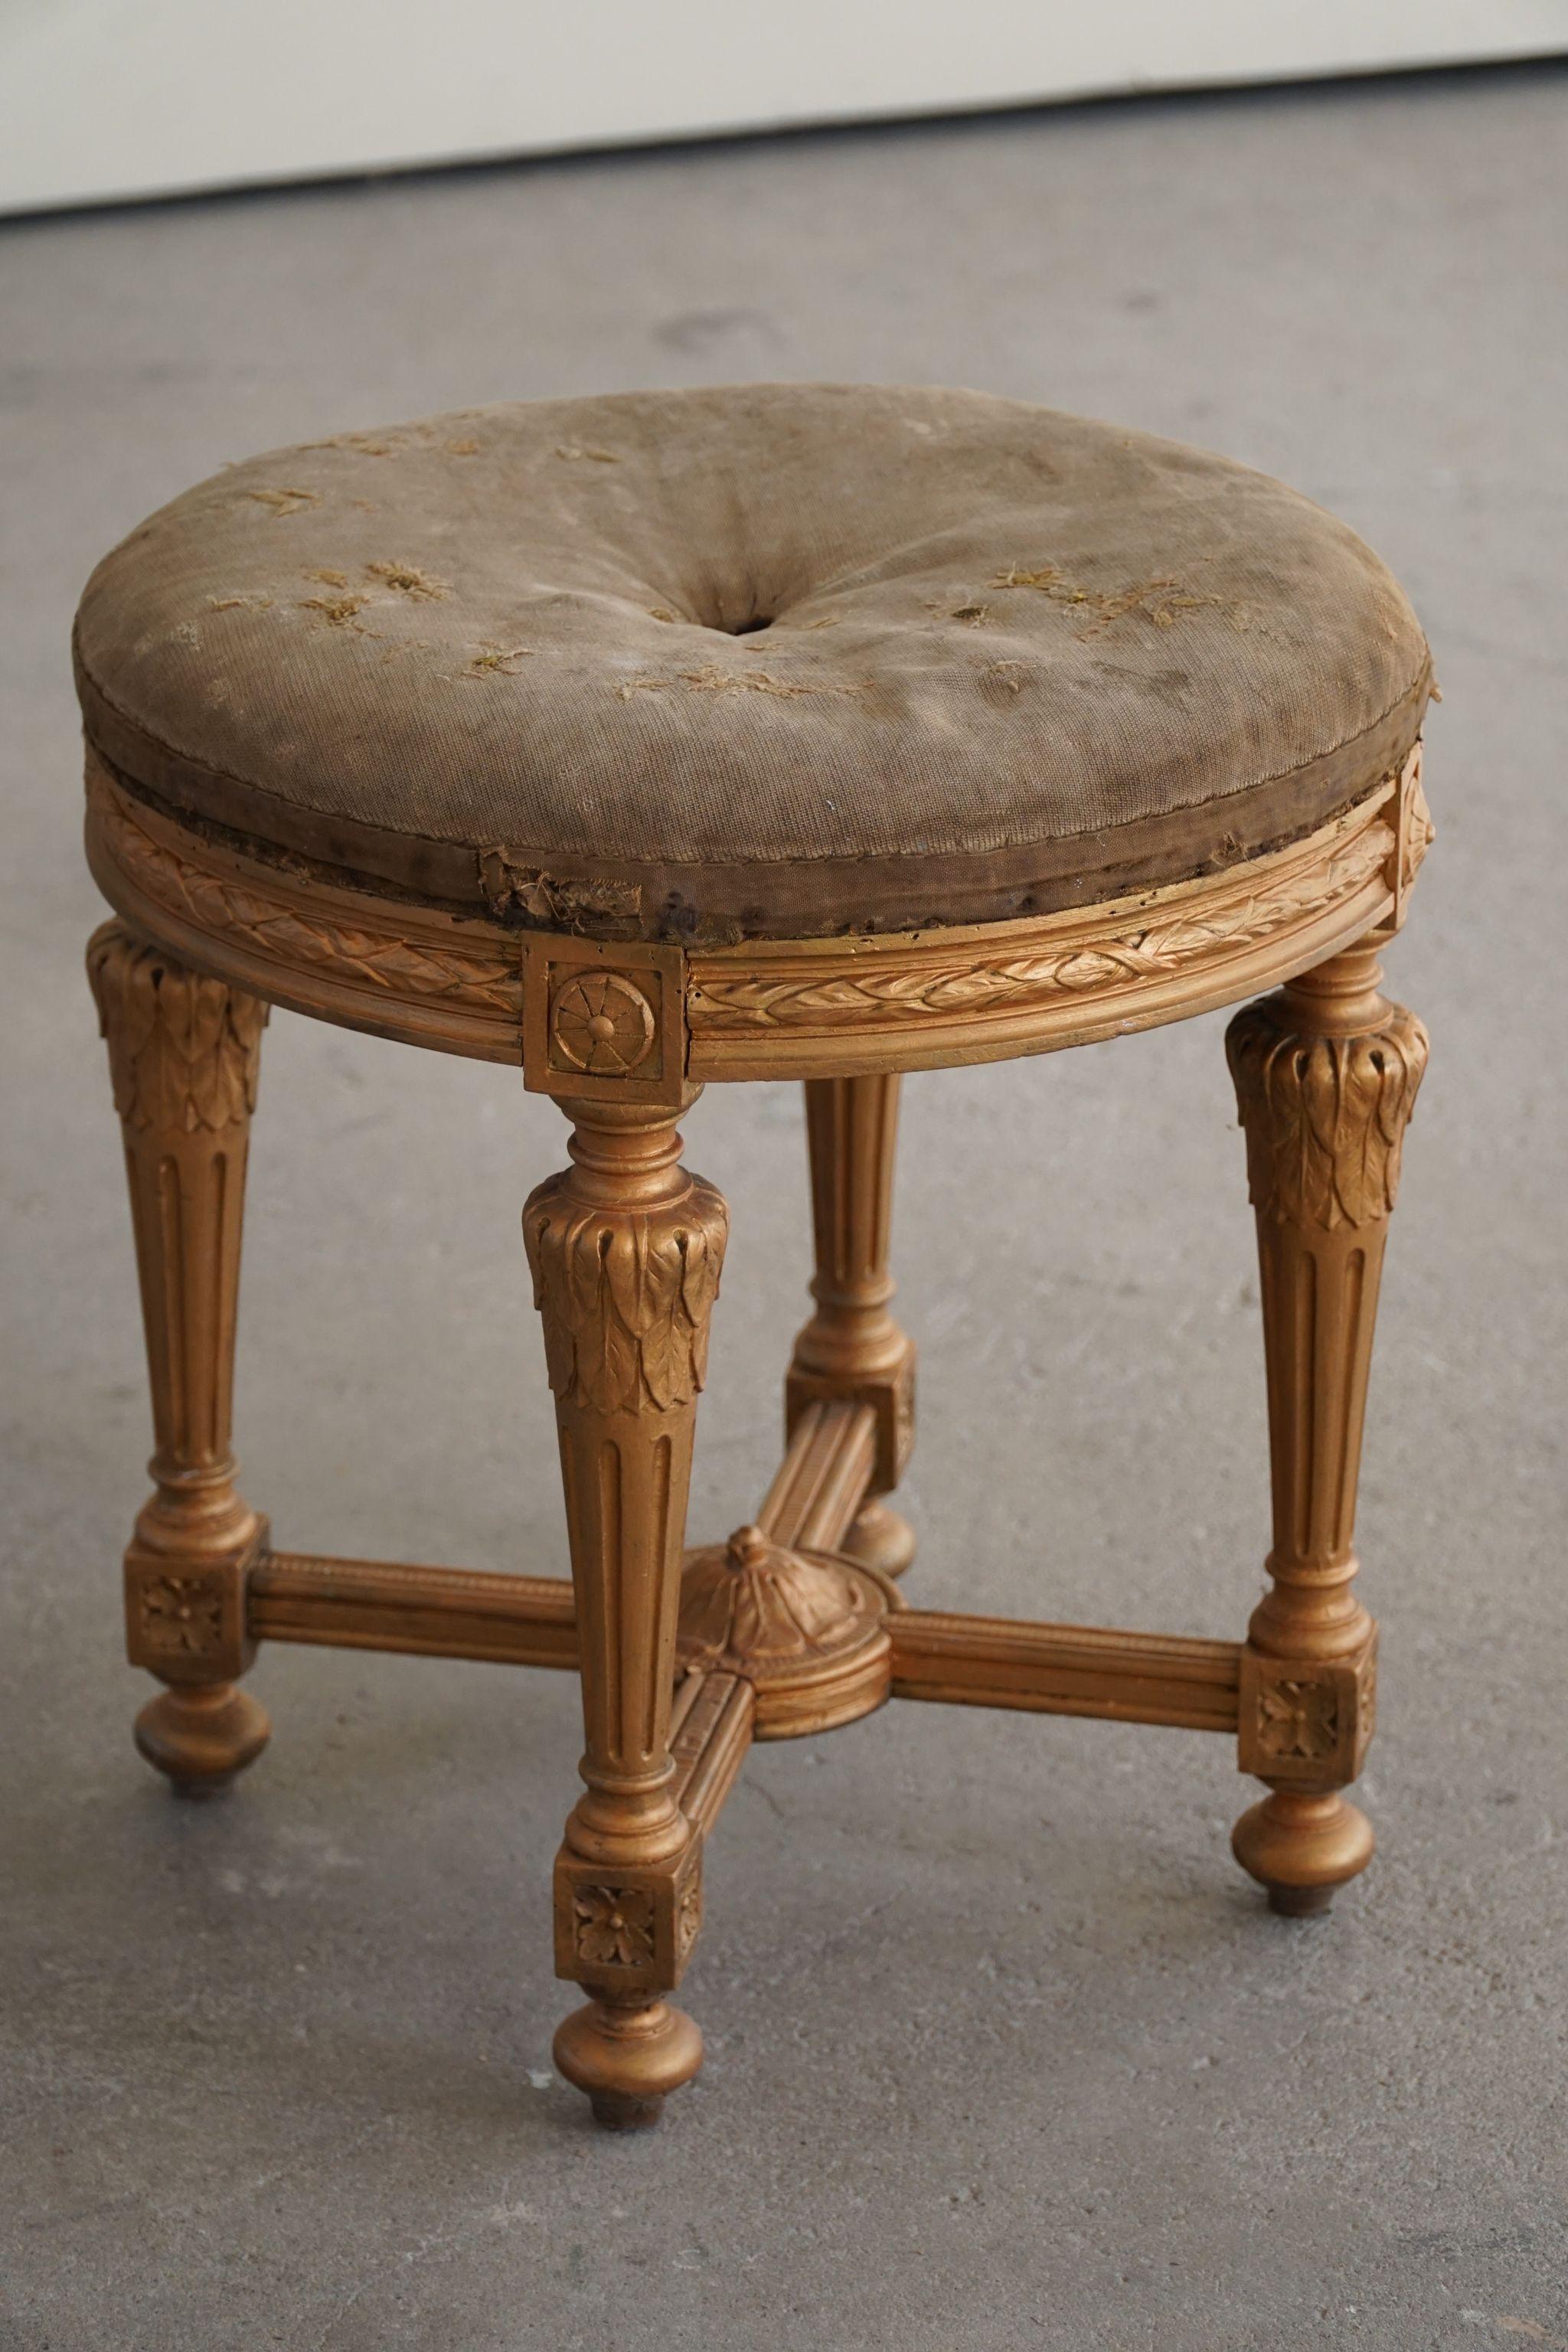 Gustavian Antique, Round Stool, Swedish Cabinetmaker, Late 18th Century For Sale 5